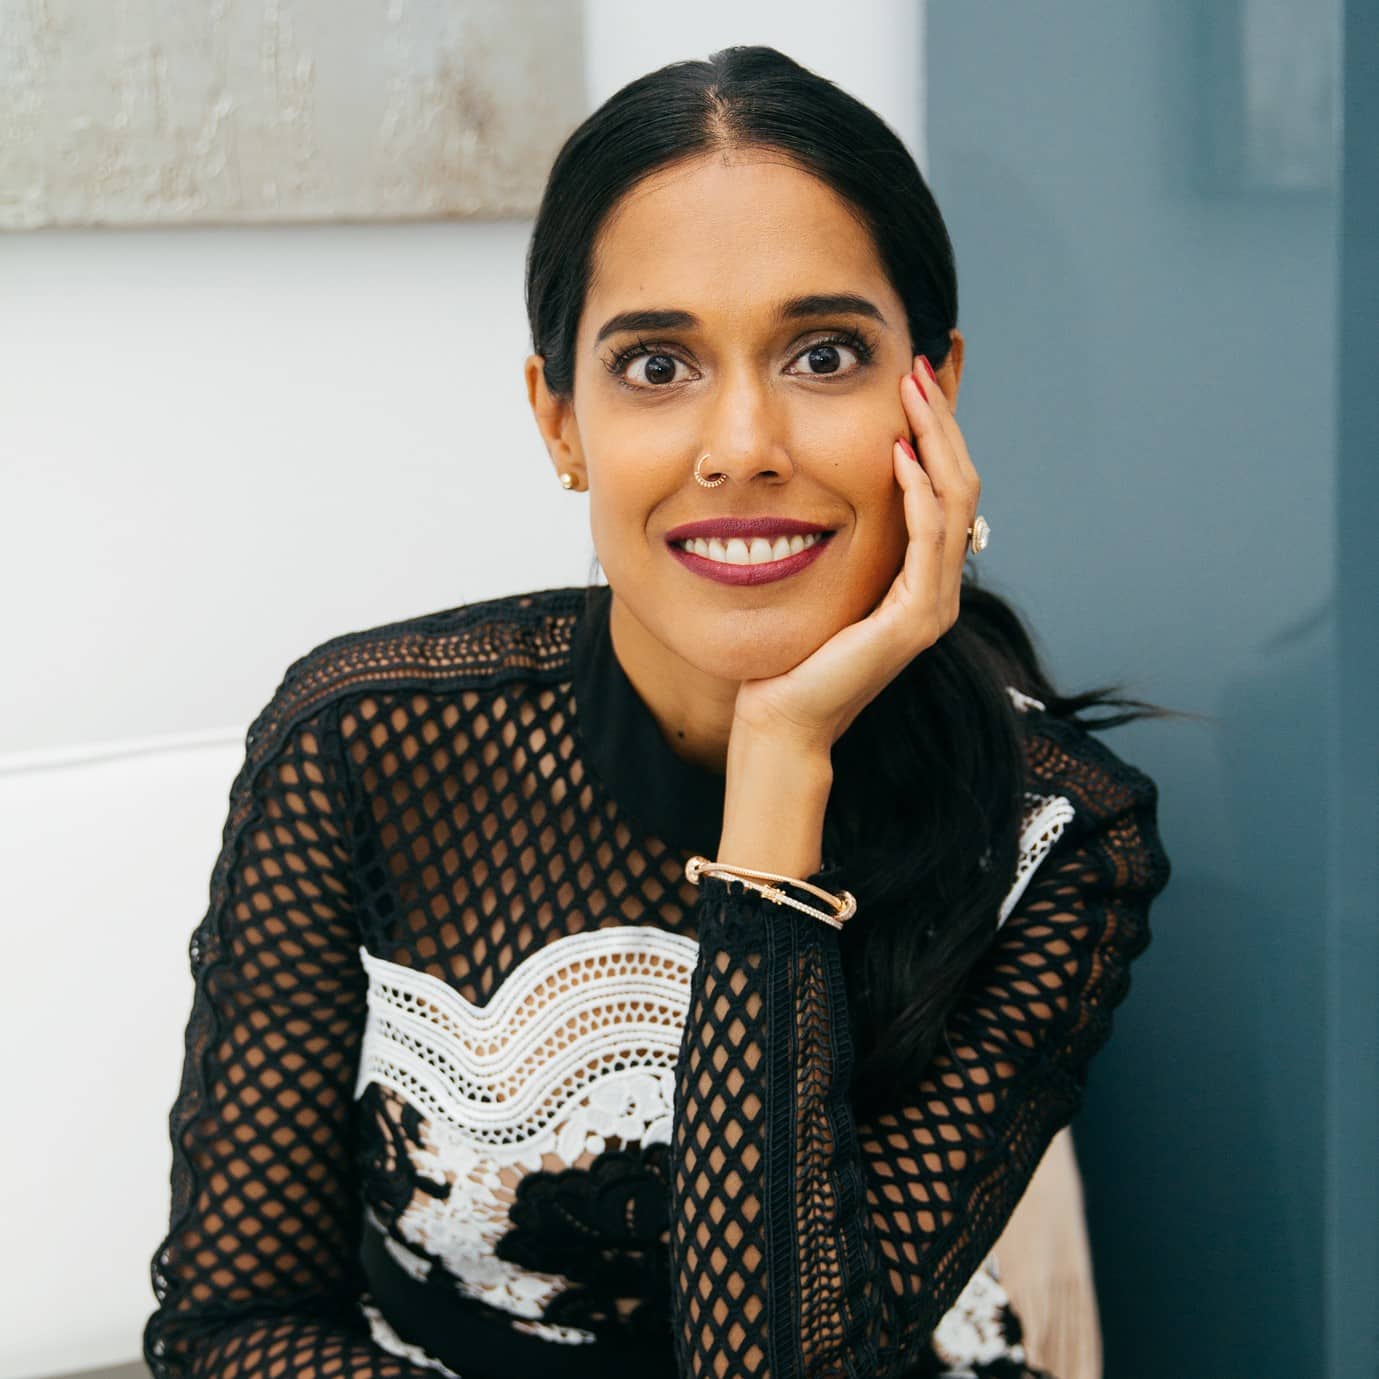 Ritu Bhasin wearing a white and black top, with her chin resting in her hand